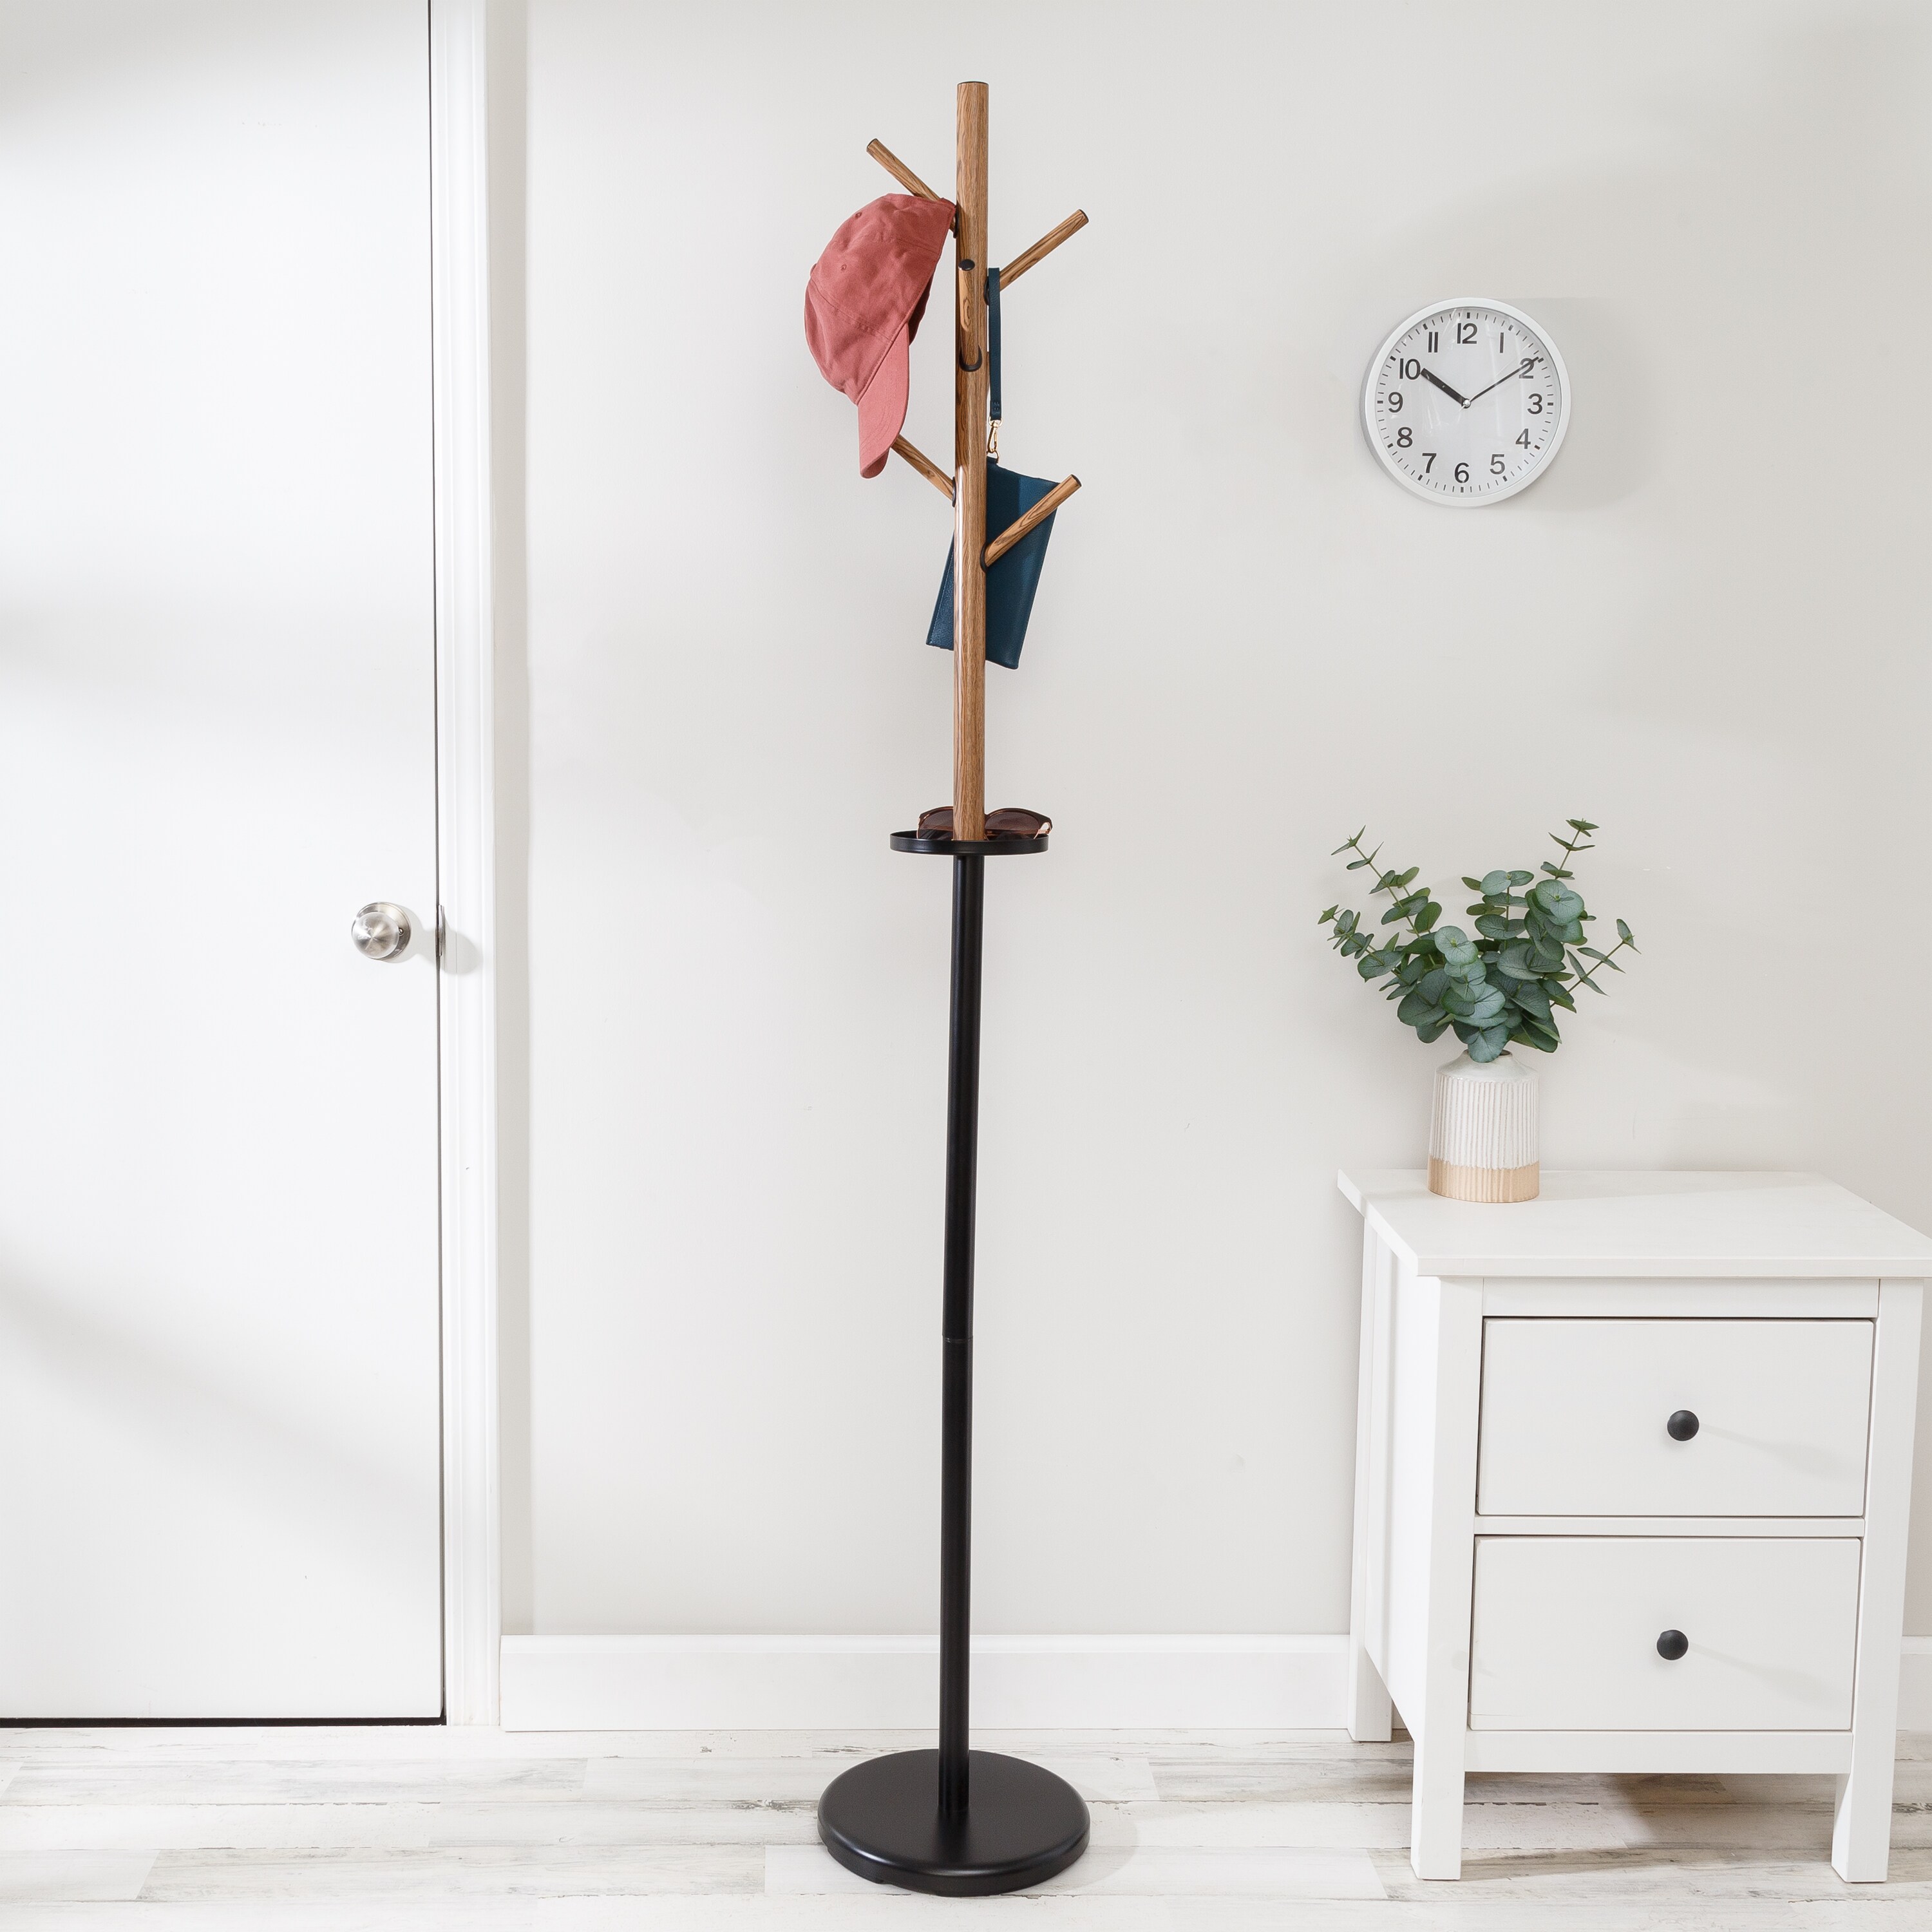 Honey-Can-Do Black 6-Hook Coat Rack the Coat & Stands department at Lowes.com